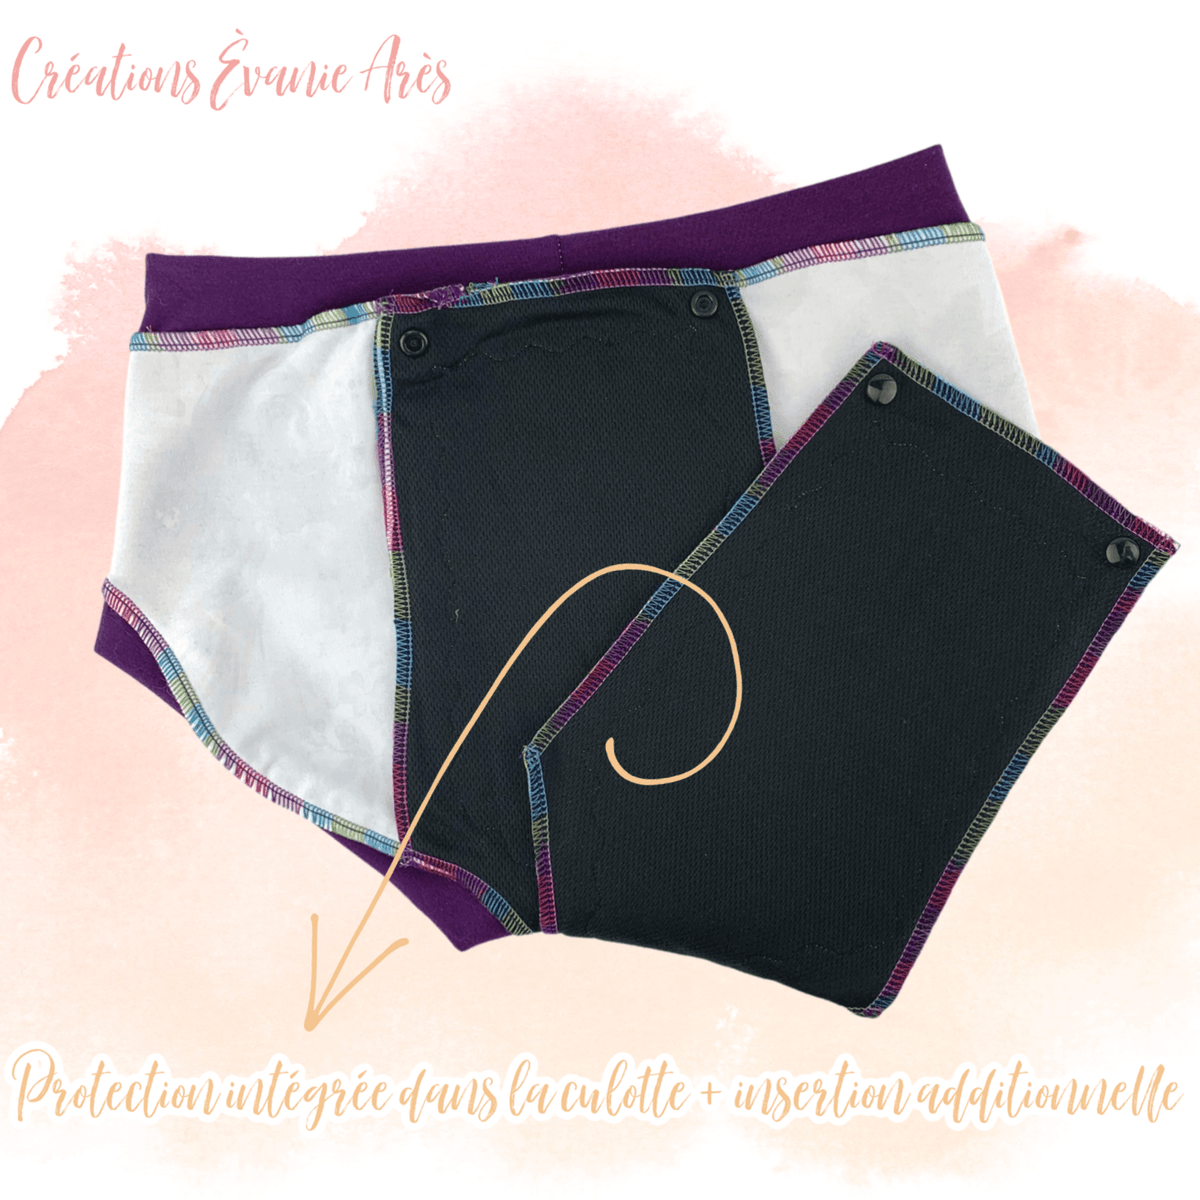 Créations Évanie Arès | Menstrual Panties Extreme protection with  additional snap button insert